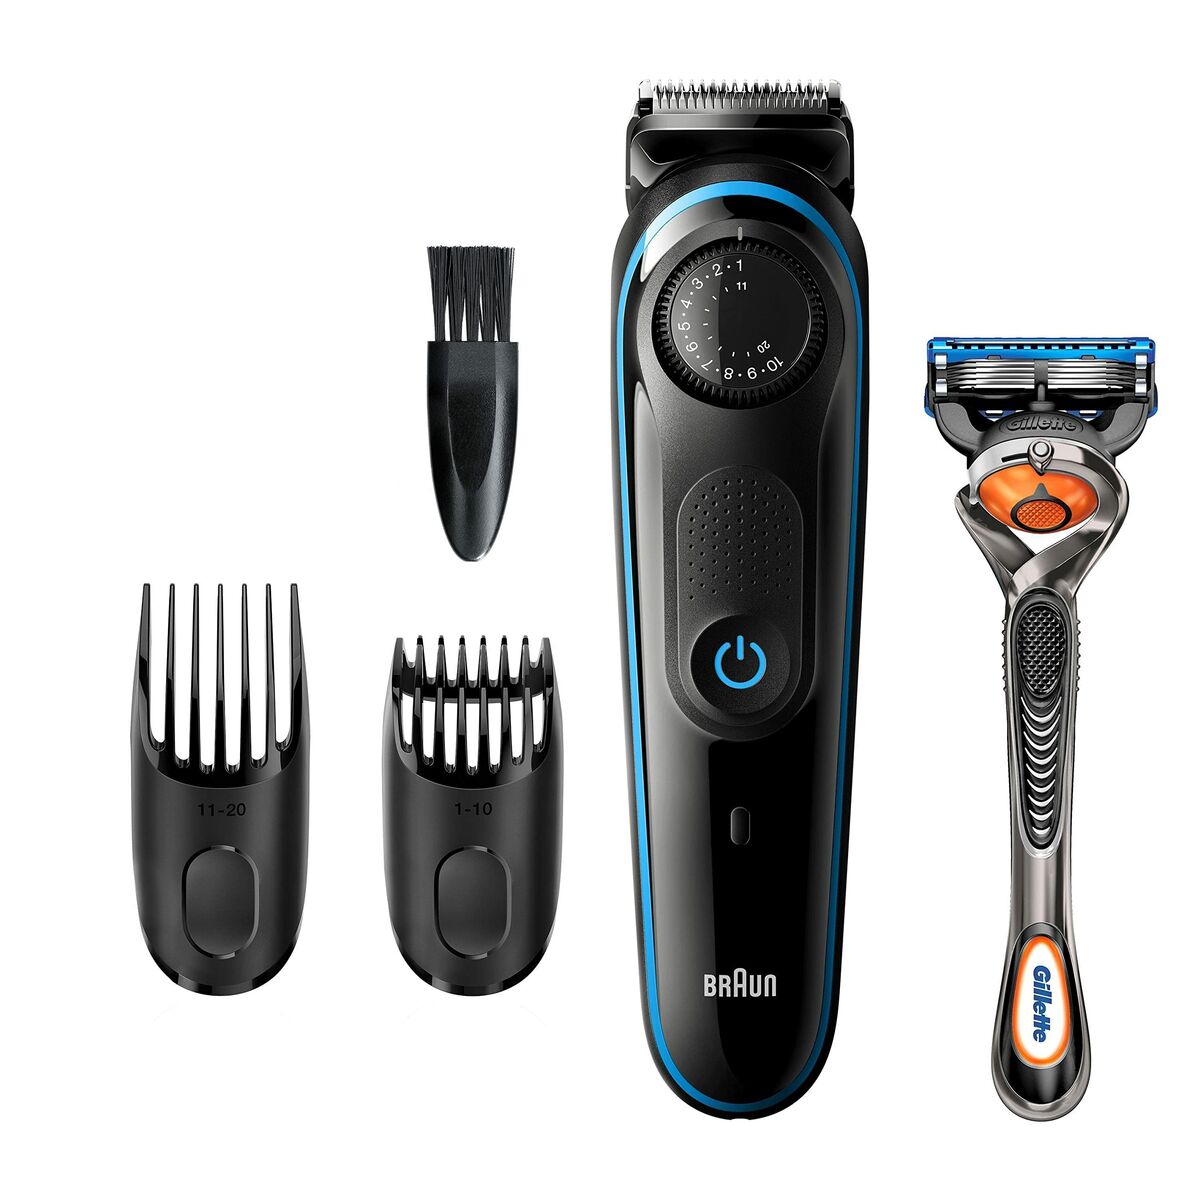 Hair clippers/Shaver Braun BT3240 Rechargeable battery Blue/Black (Refurbished D)